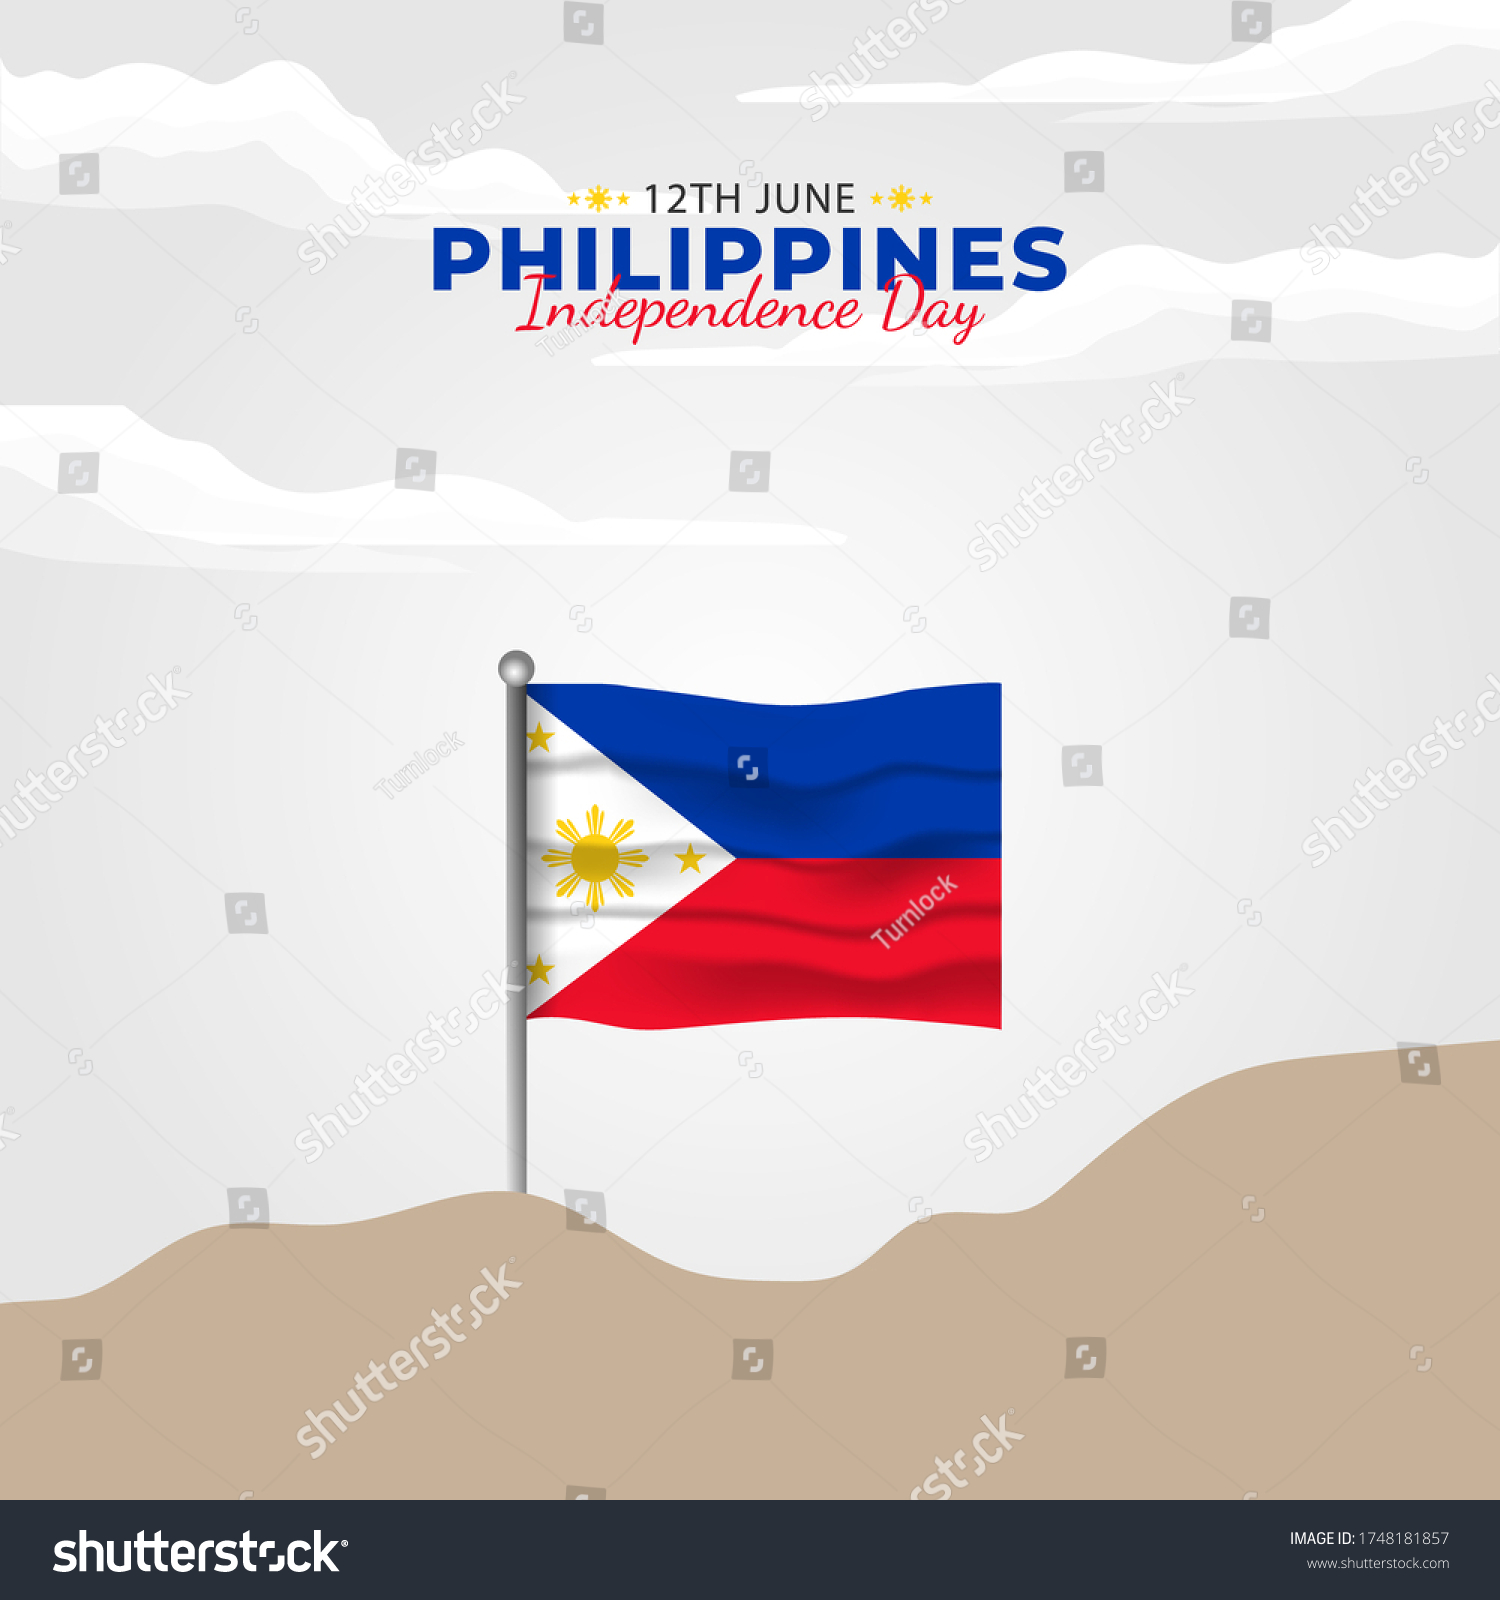 SVG of Filipino Araw ng Kalayaan (Translate: Philippine Independence Day) is the Philippine National Day and Republic Day, which is celebrated on 12 June each year. vector illustration svg